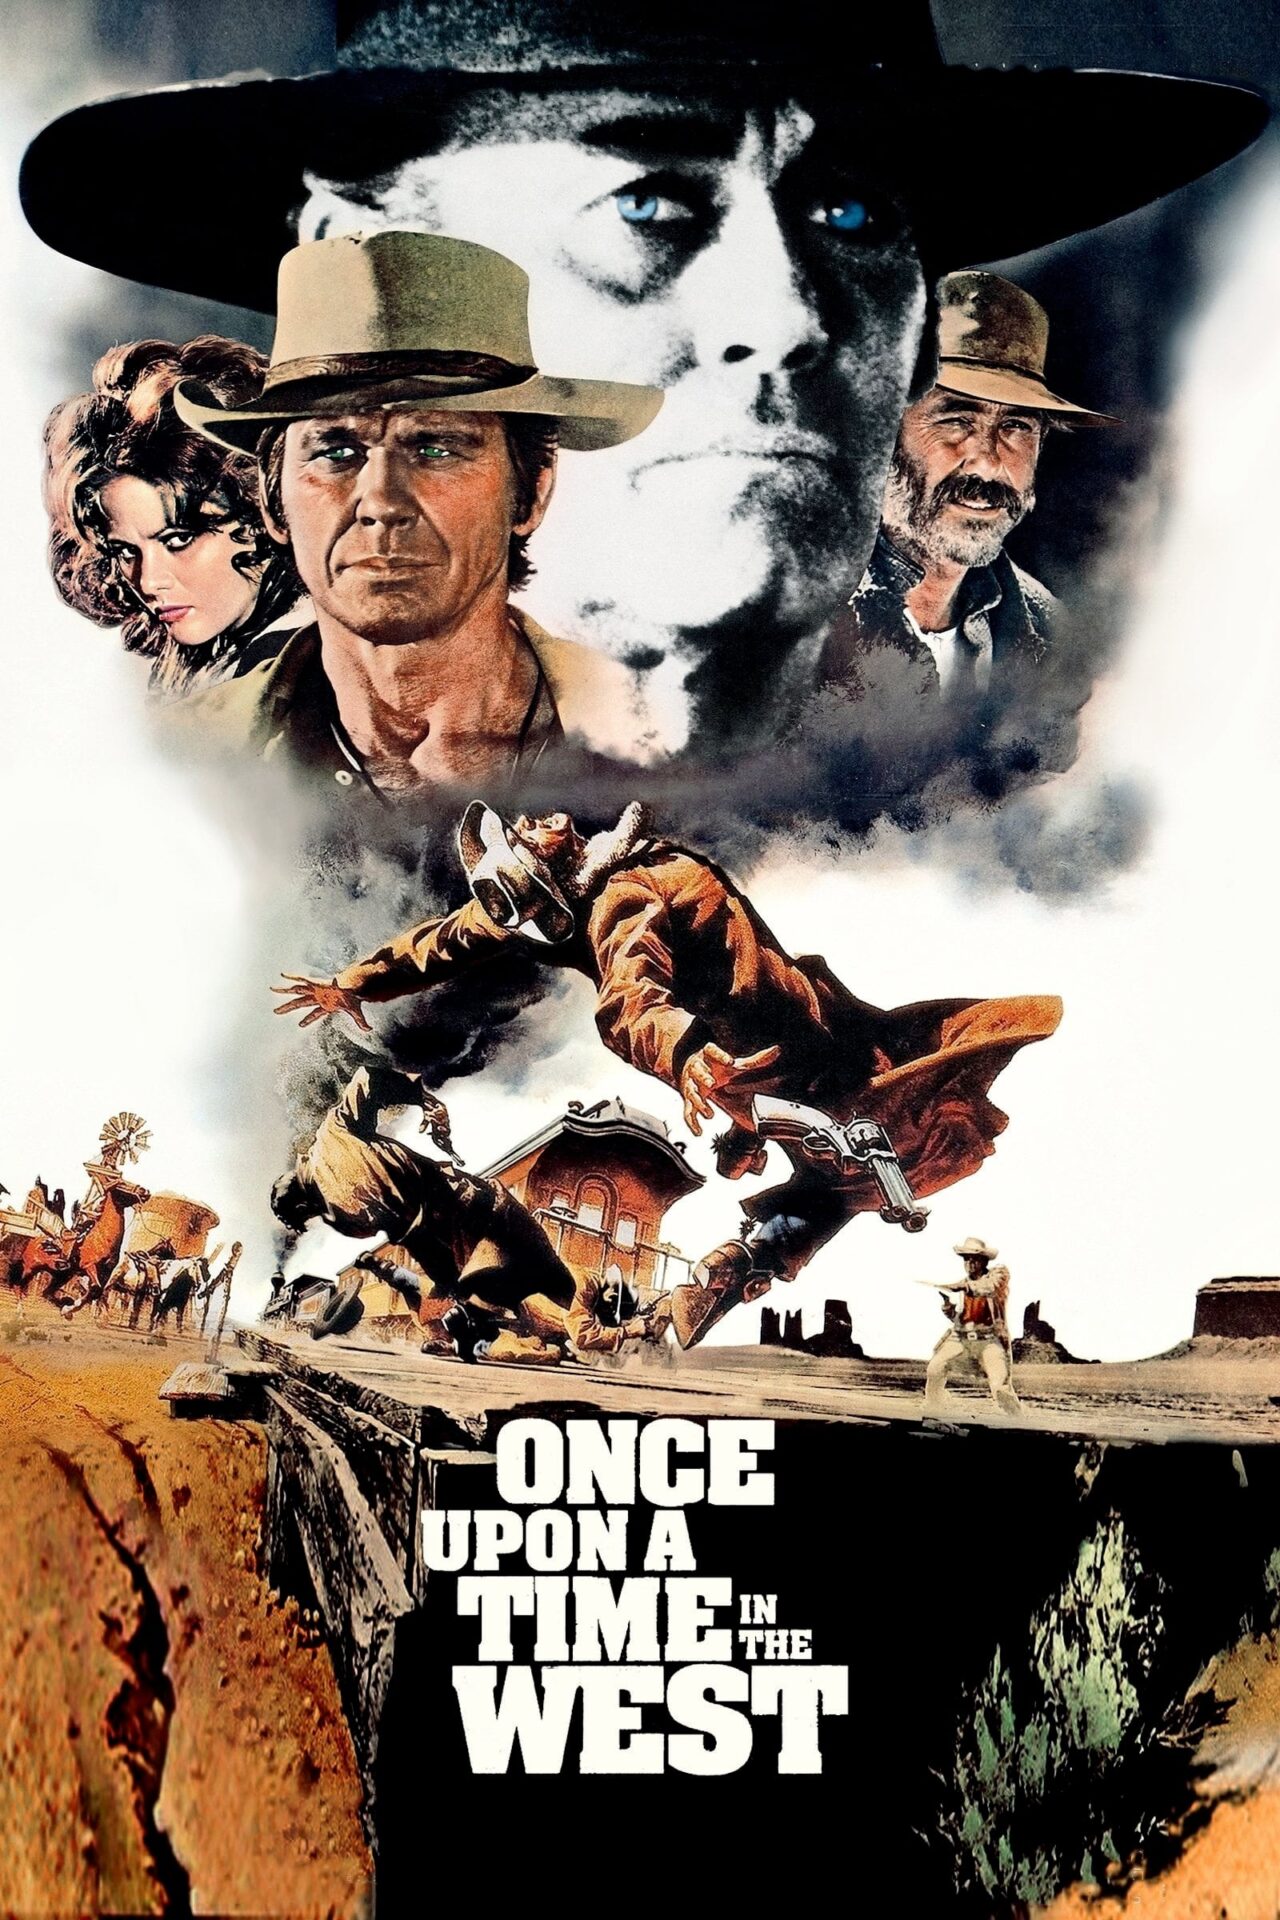 Once-Upon-a-Time-in-the-West-izle.jpg